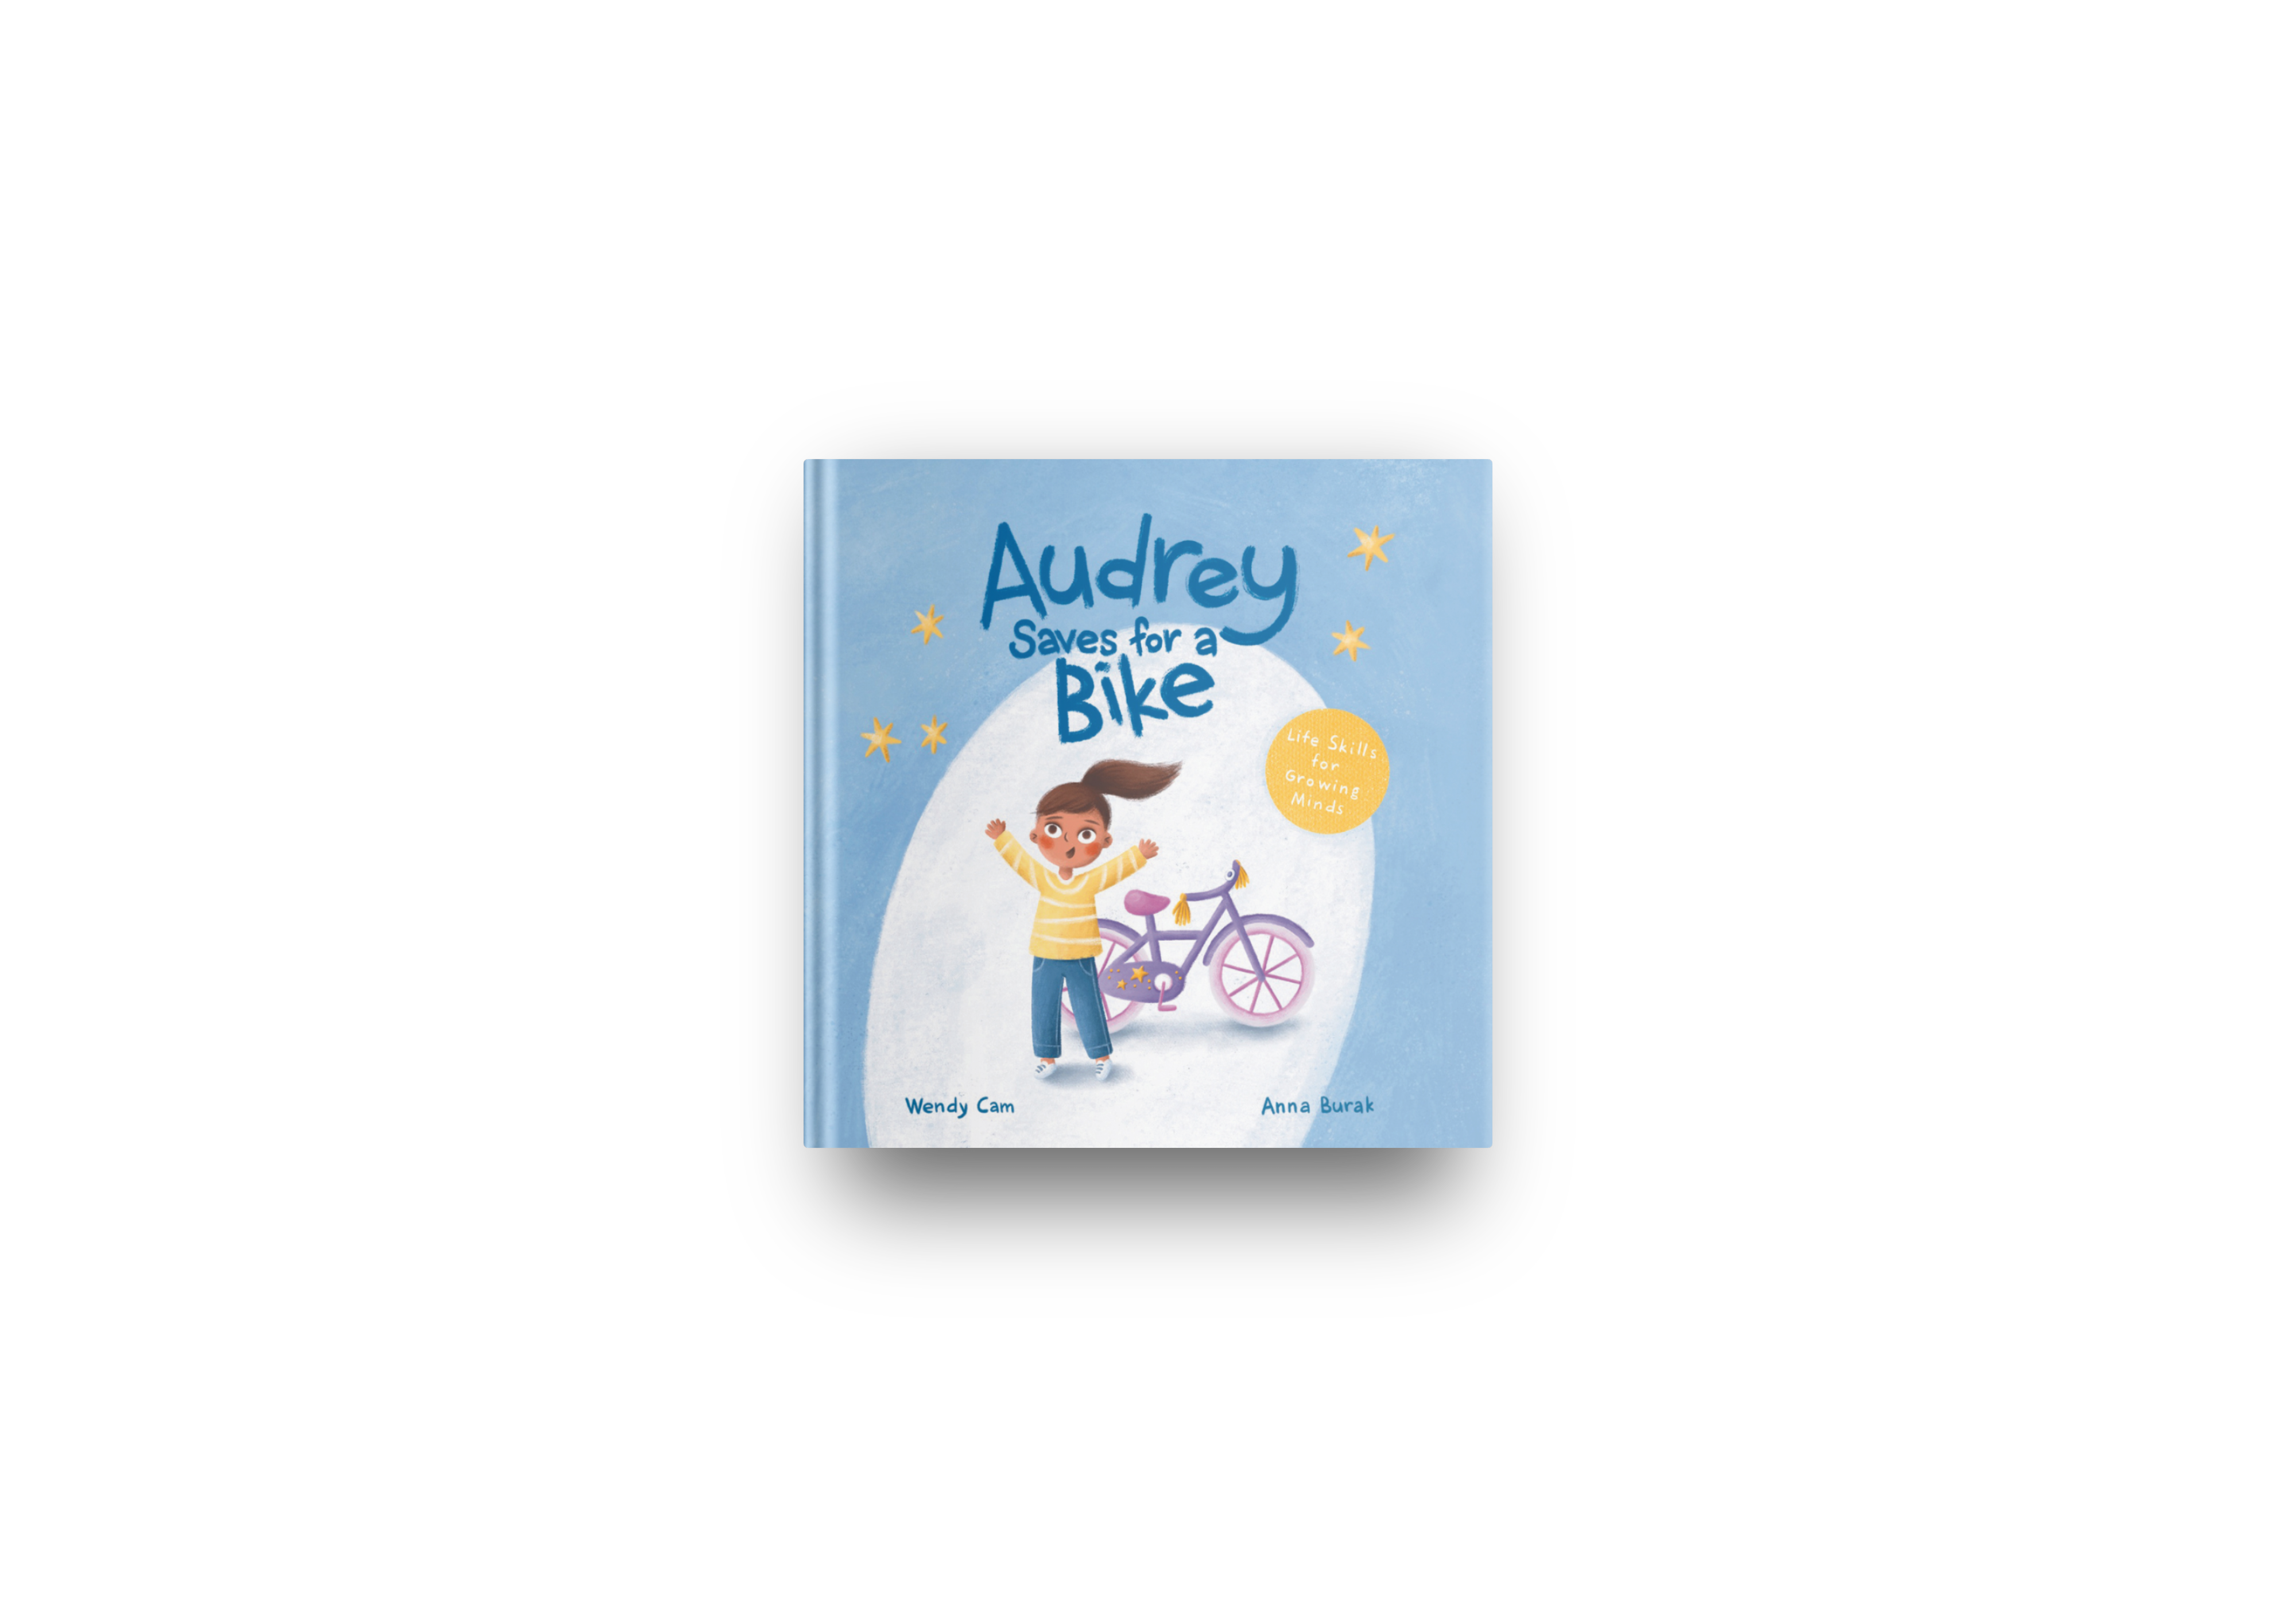 Audrey Saves for a Bike (Hardcover)– A children’s picture book imparting life lessons such as patience and delayed gratification.